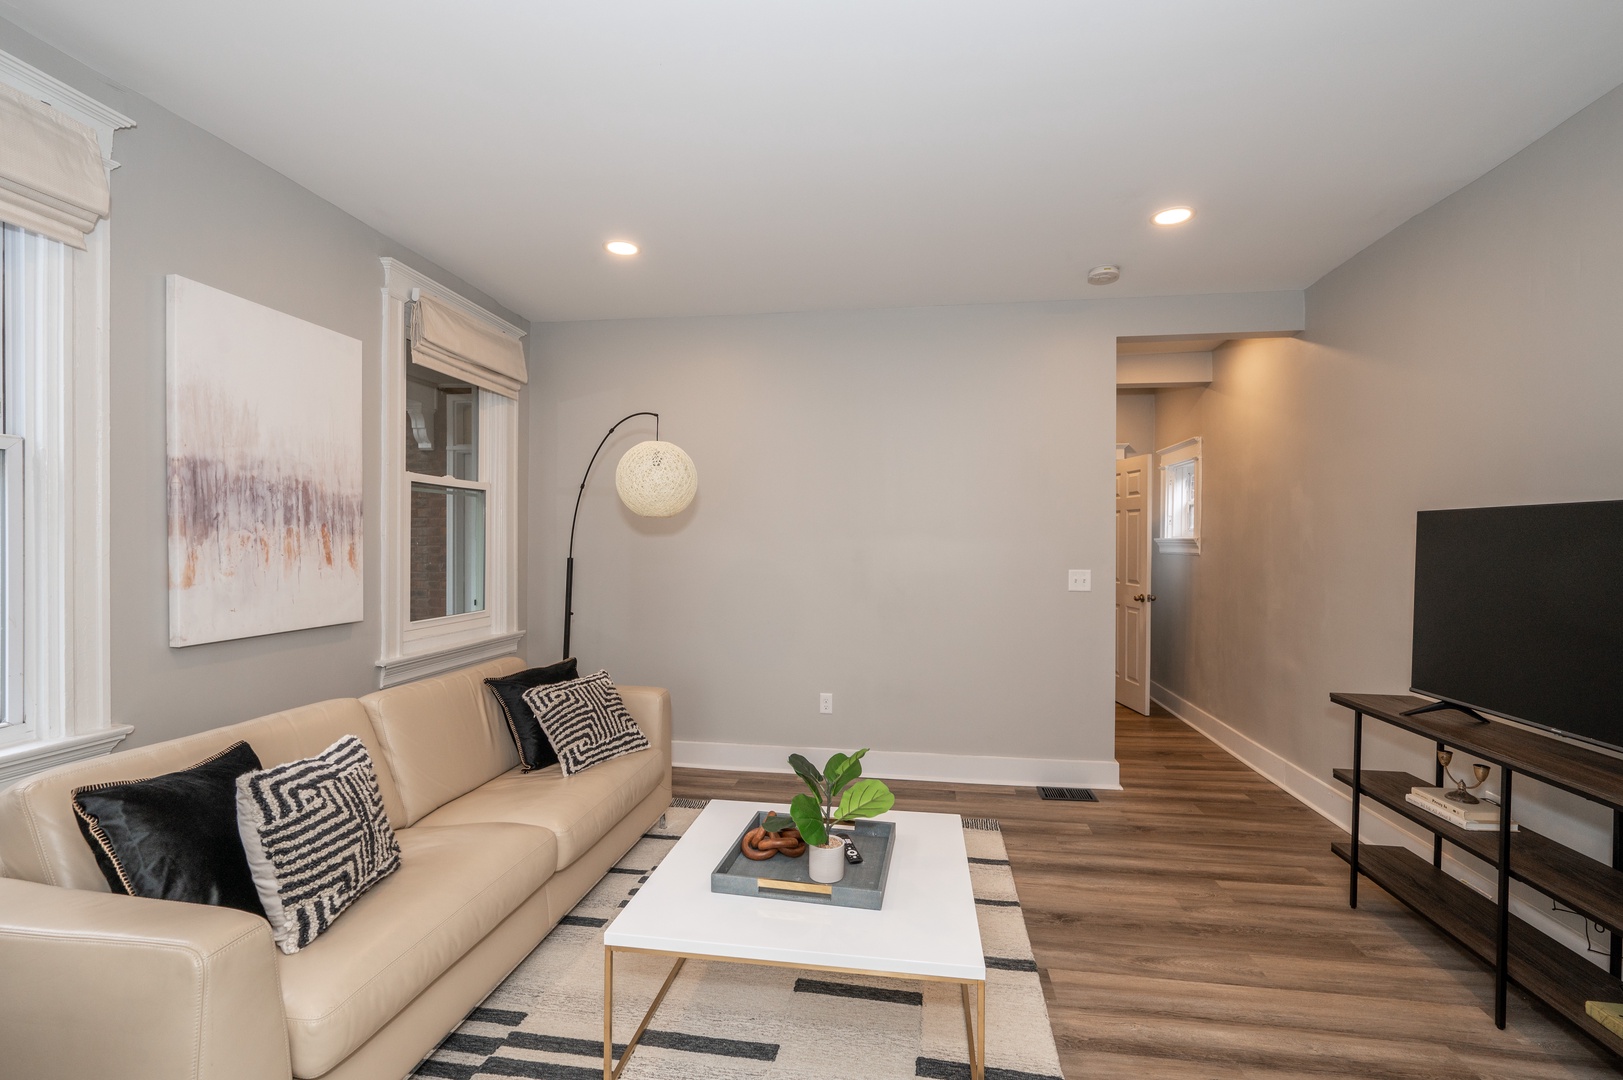 Apt 1 – The living room is the perfect spot to relax & enjoy a movie or a show